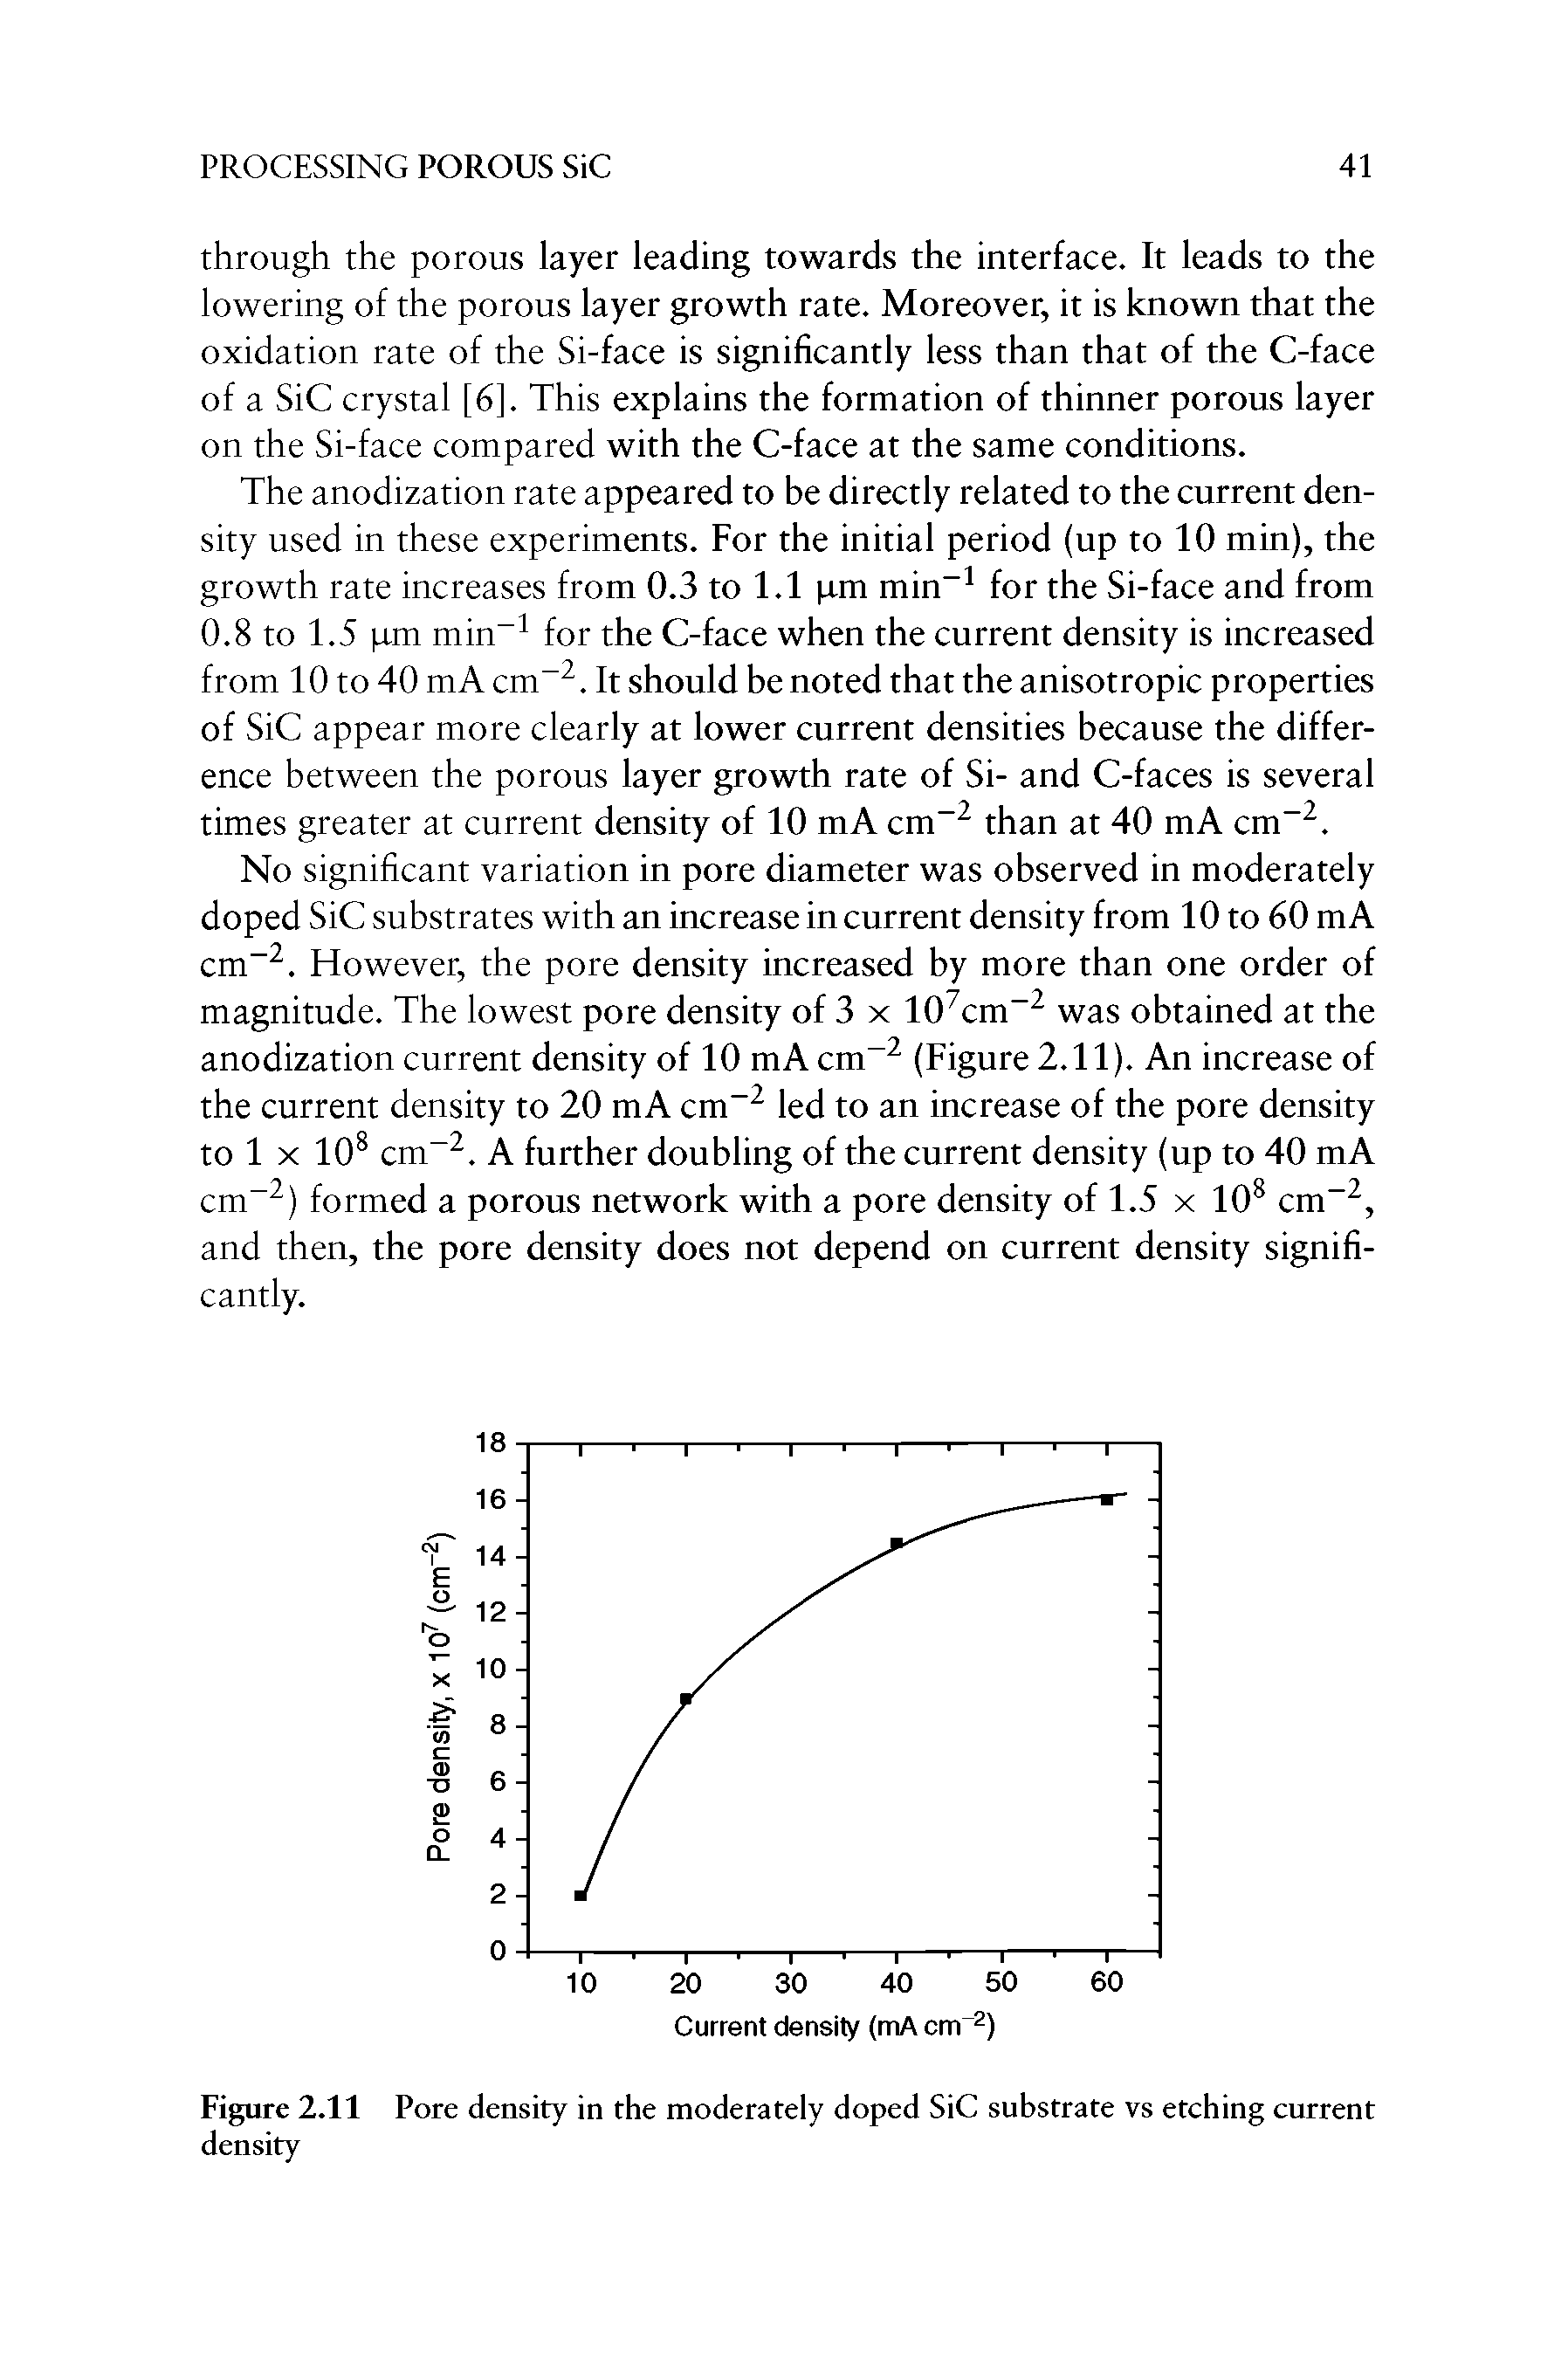 Figure 2.11 Pore density in the moderately doped SiC substrate vs etching current density...